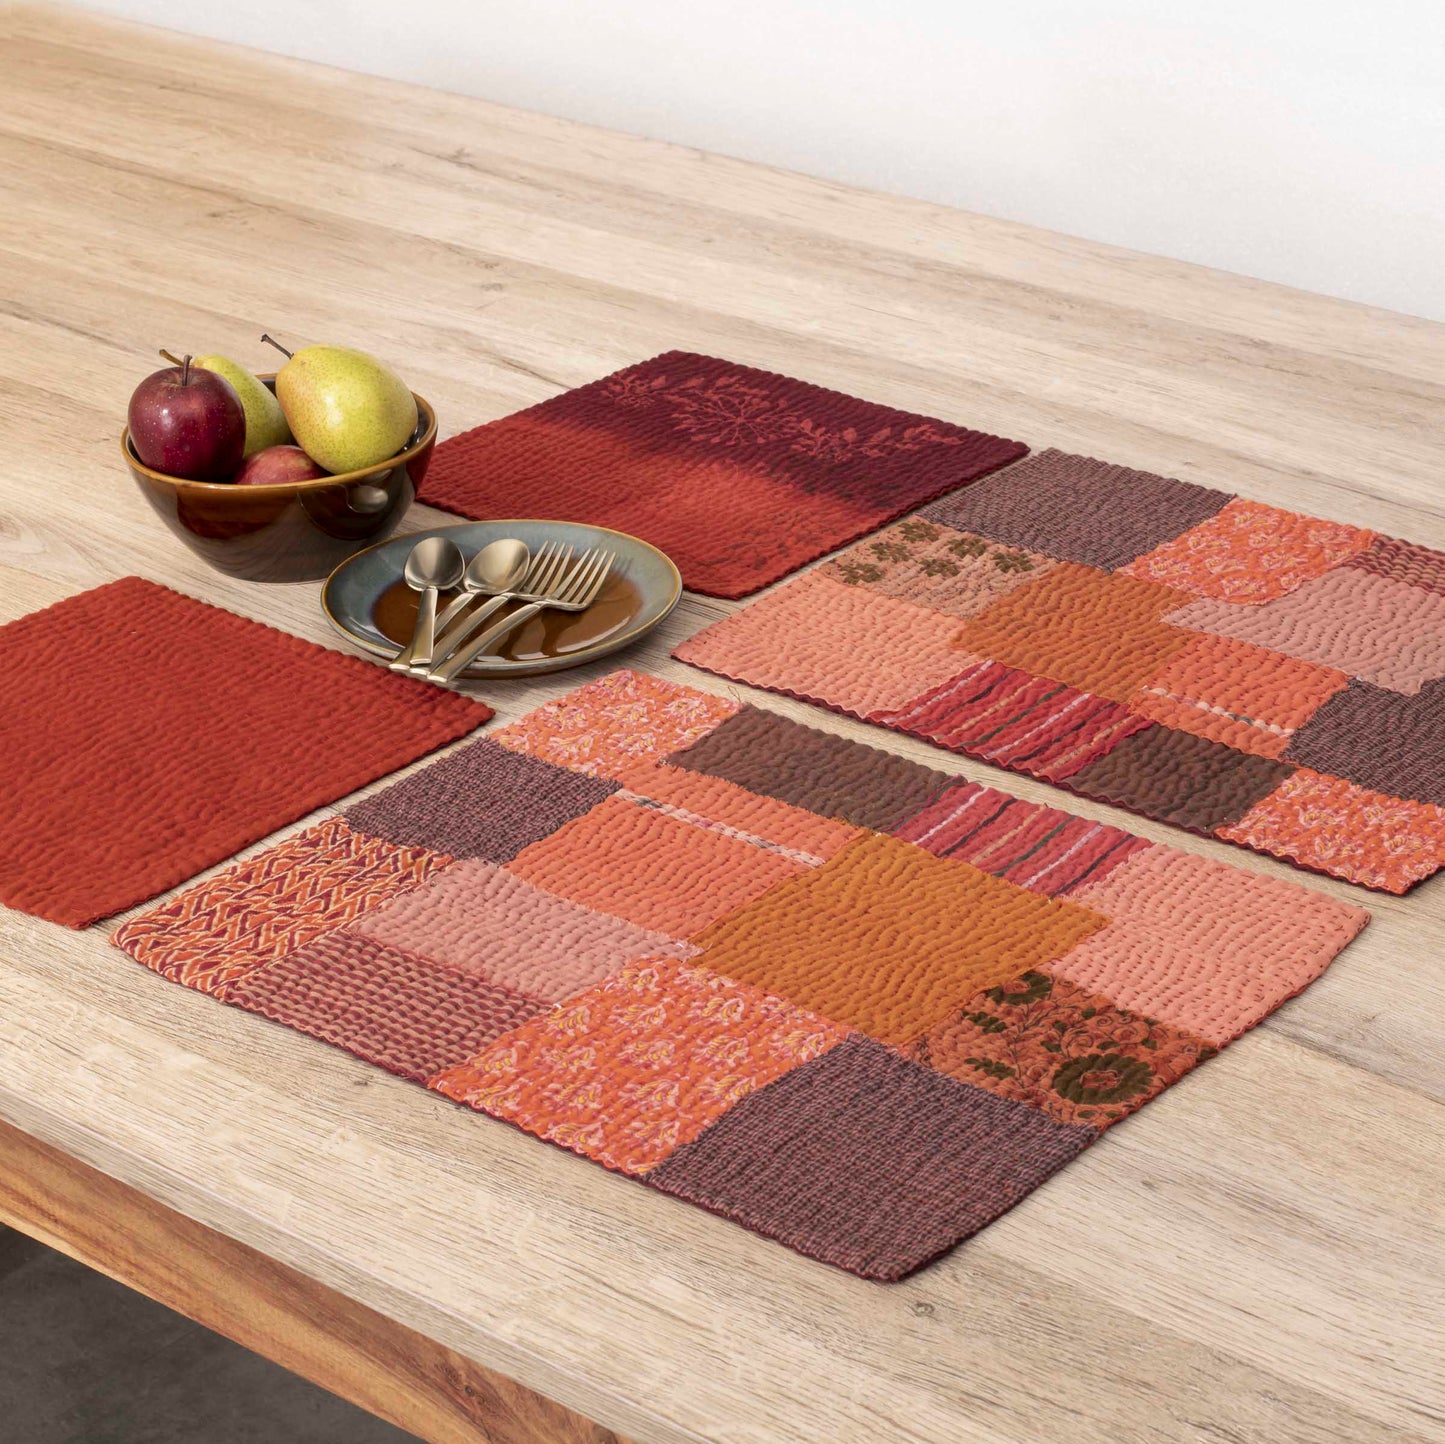 Ombre Patch Handmade Placemats - Orange (SET OF 2)